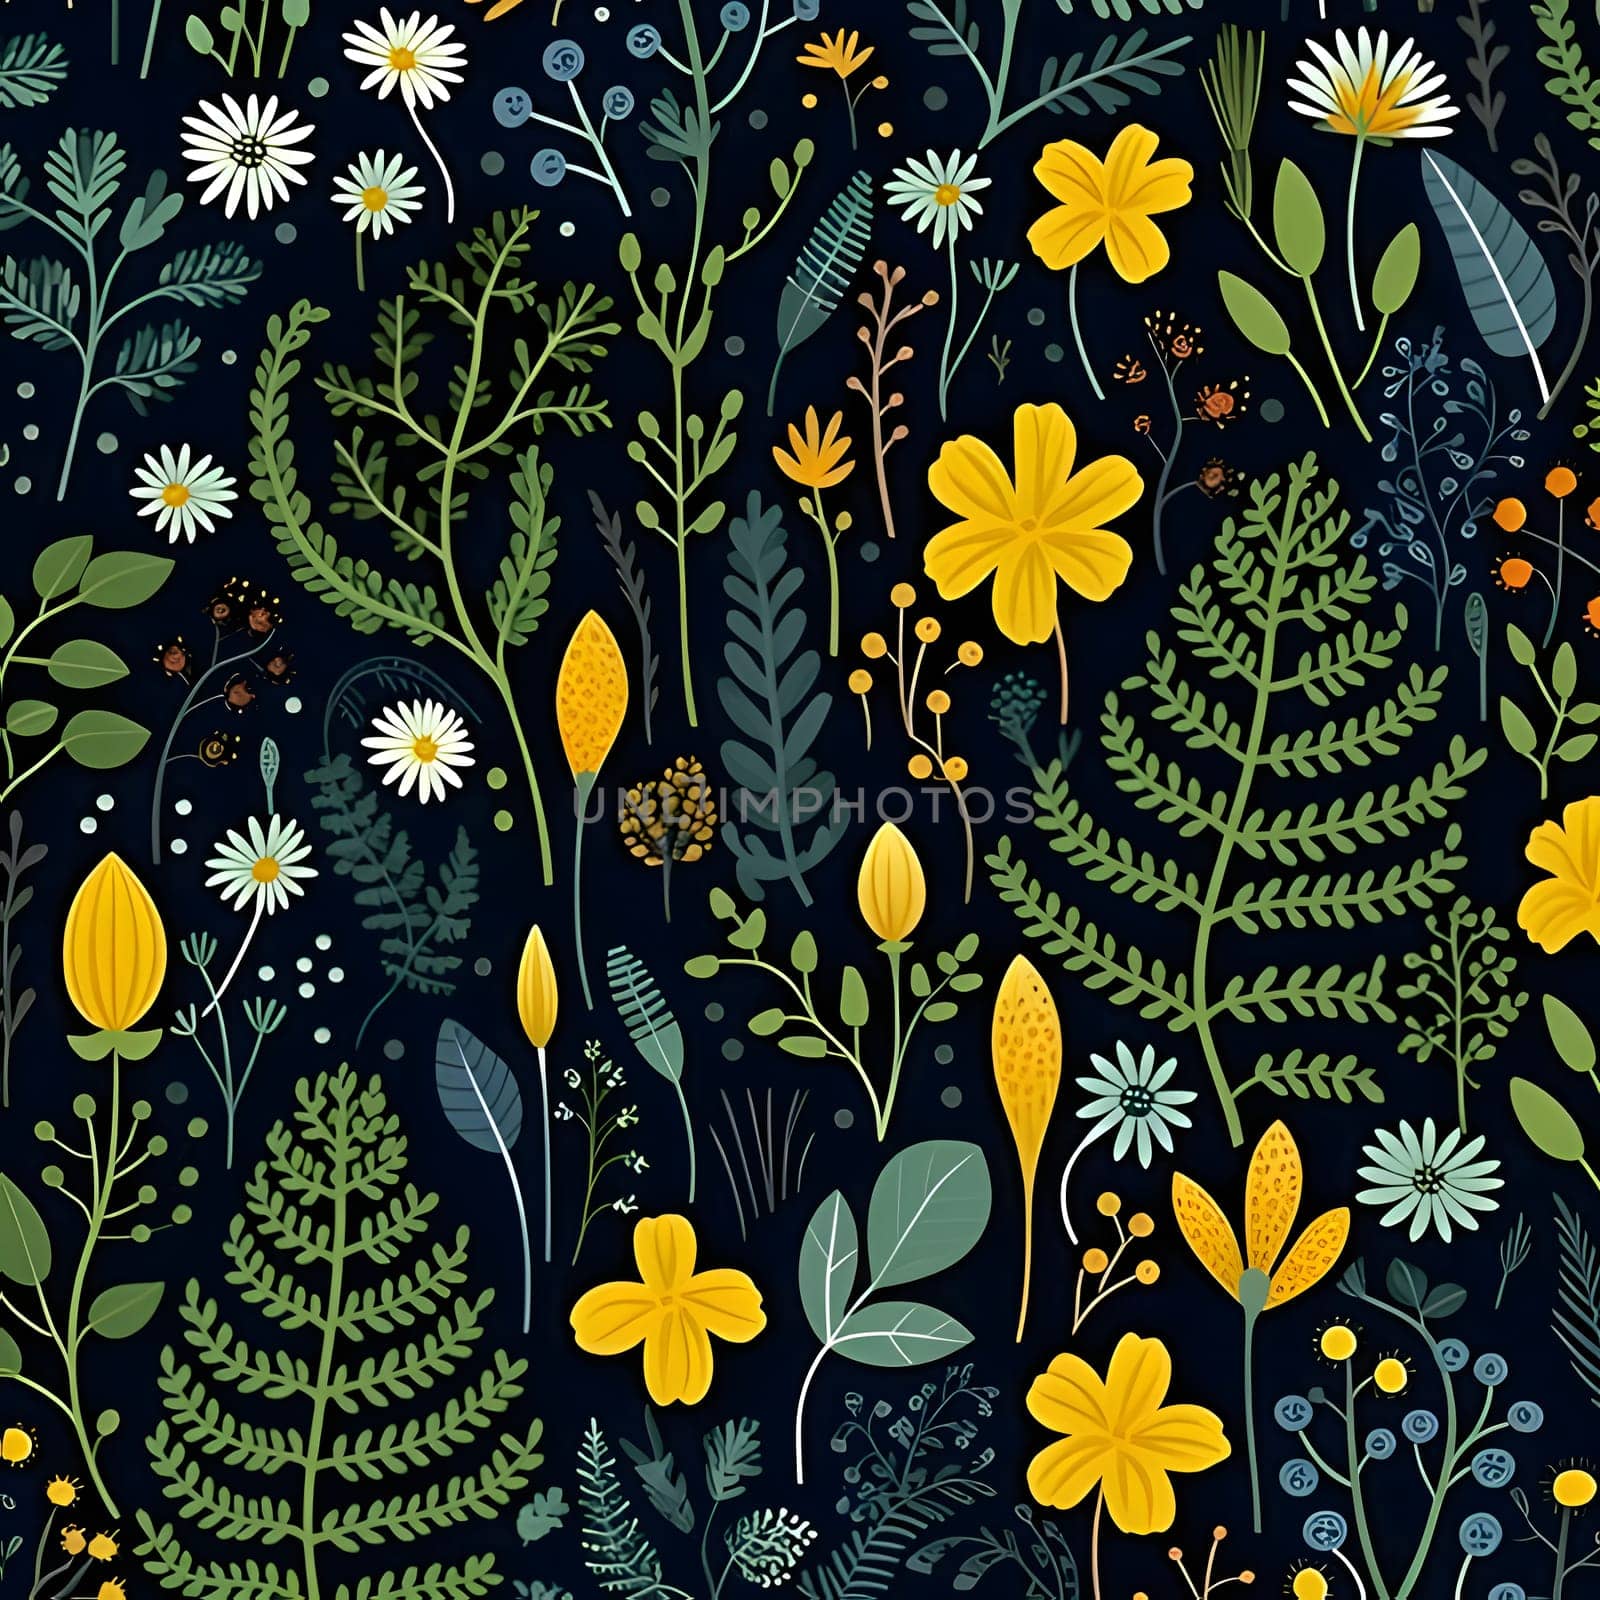 Patterns and banners backgrounds: Seamless pattern with wildflowers and leaves. Vector illustration.